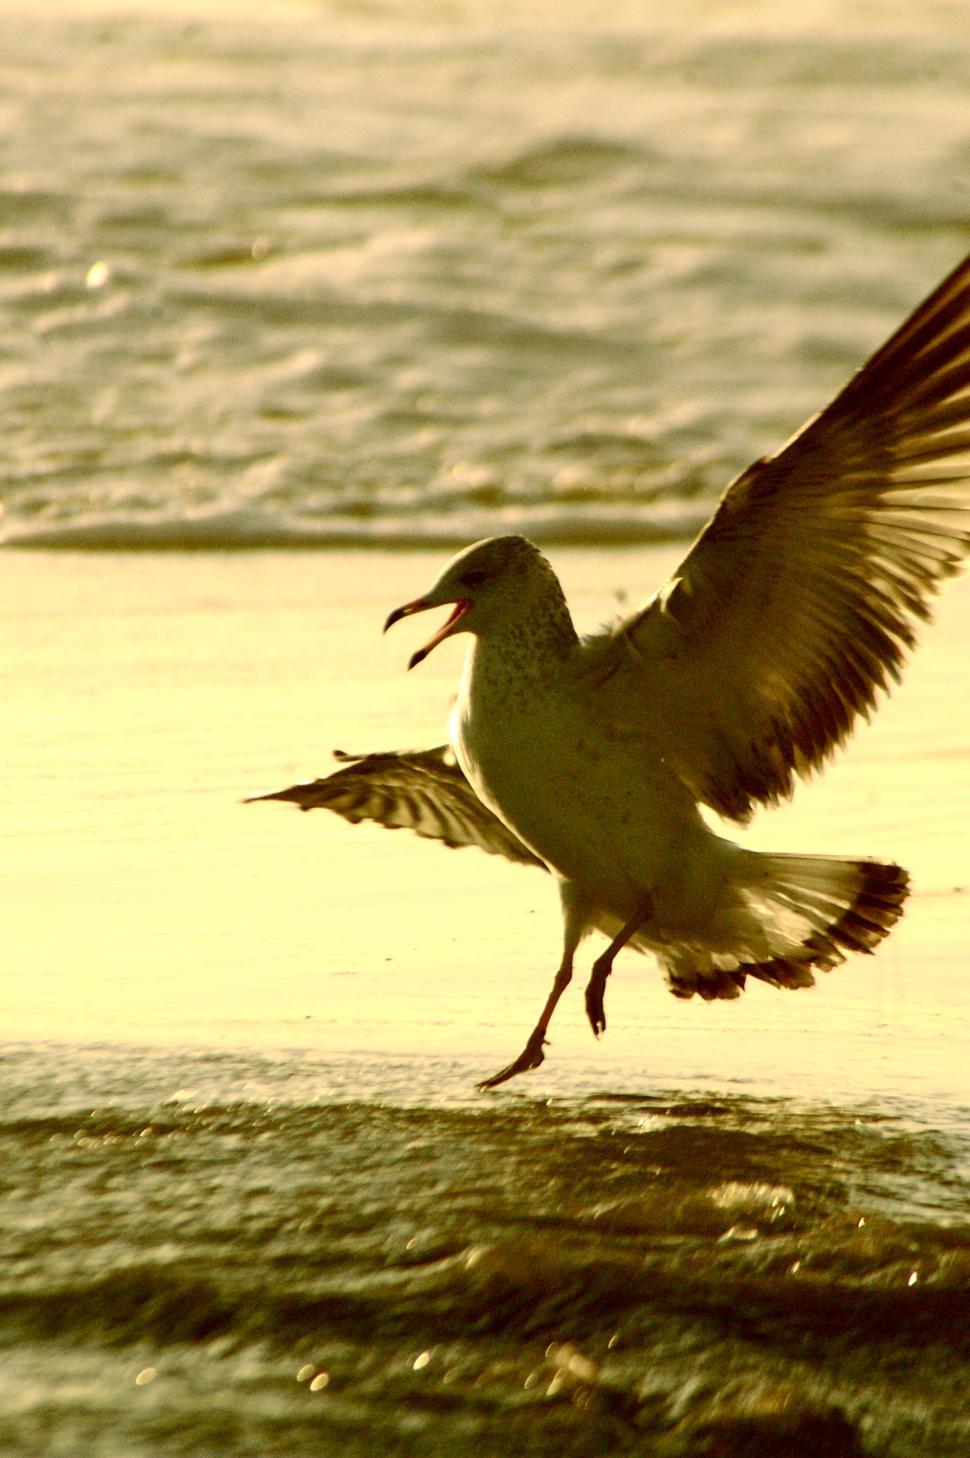 Free Image of Bird Lands by the Ocean Beach 